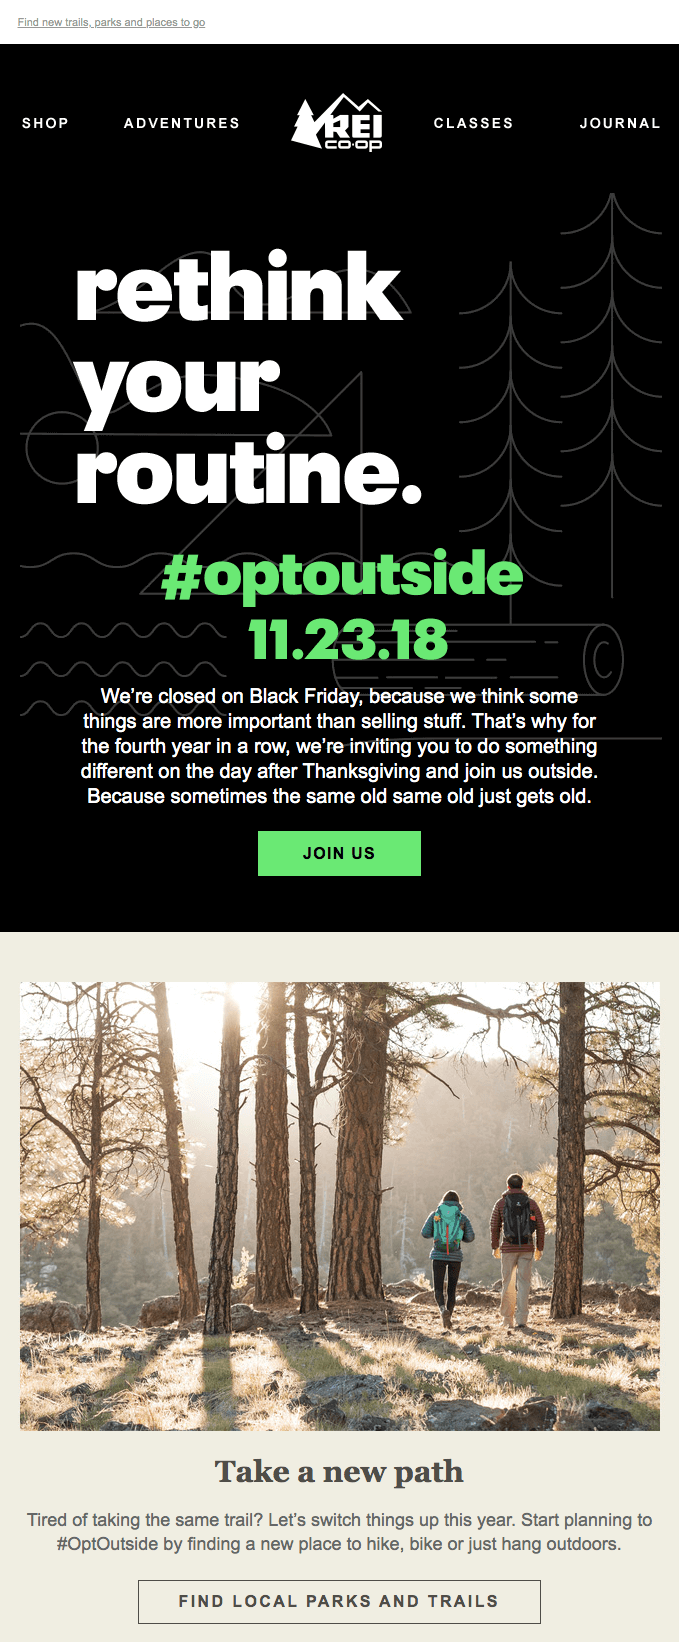 This Black Friday email states that the stores will be closed and invites the brand’s subscribers to join them in hanging outside with the optoutside hashtag.